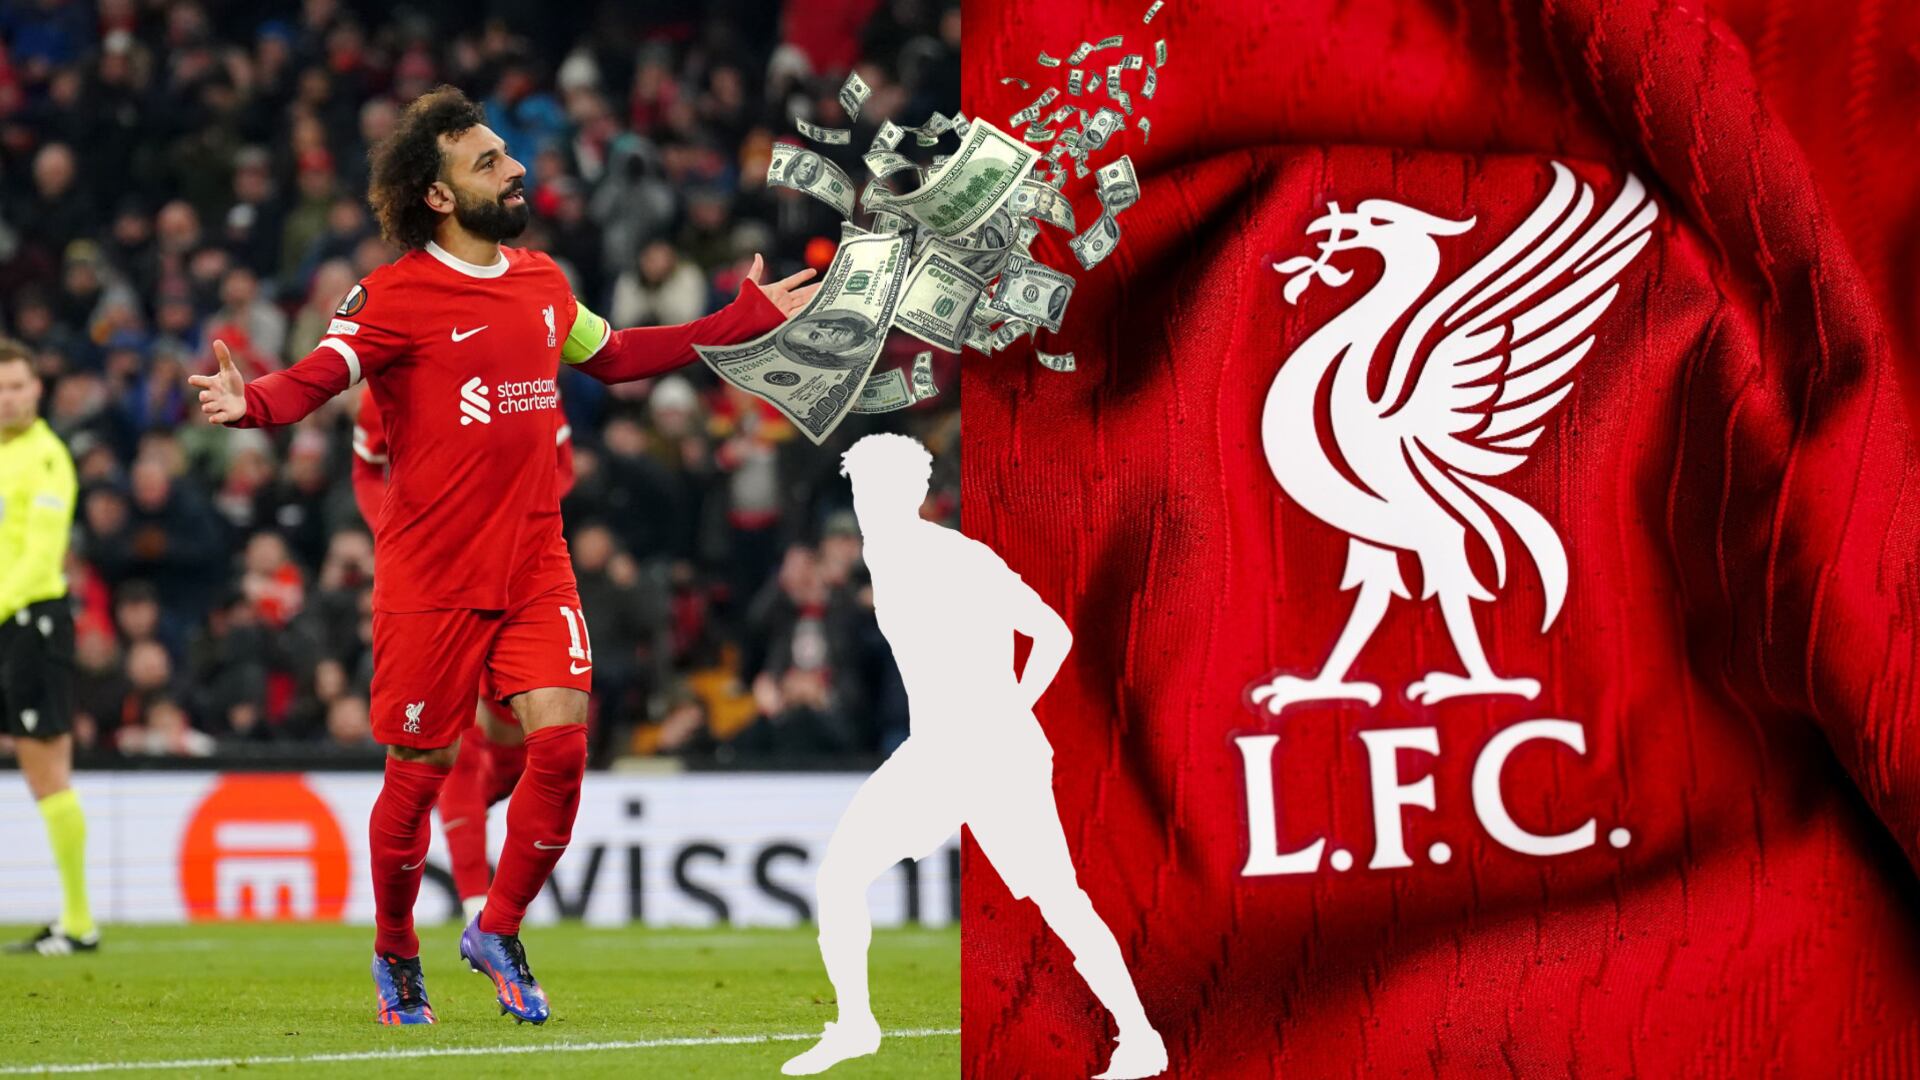 Not just Salah, the Liverpool player who could leave this summer for $94M